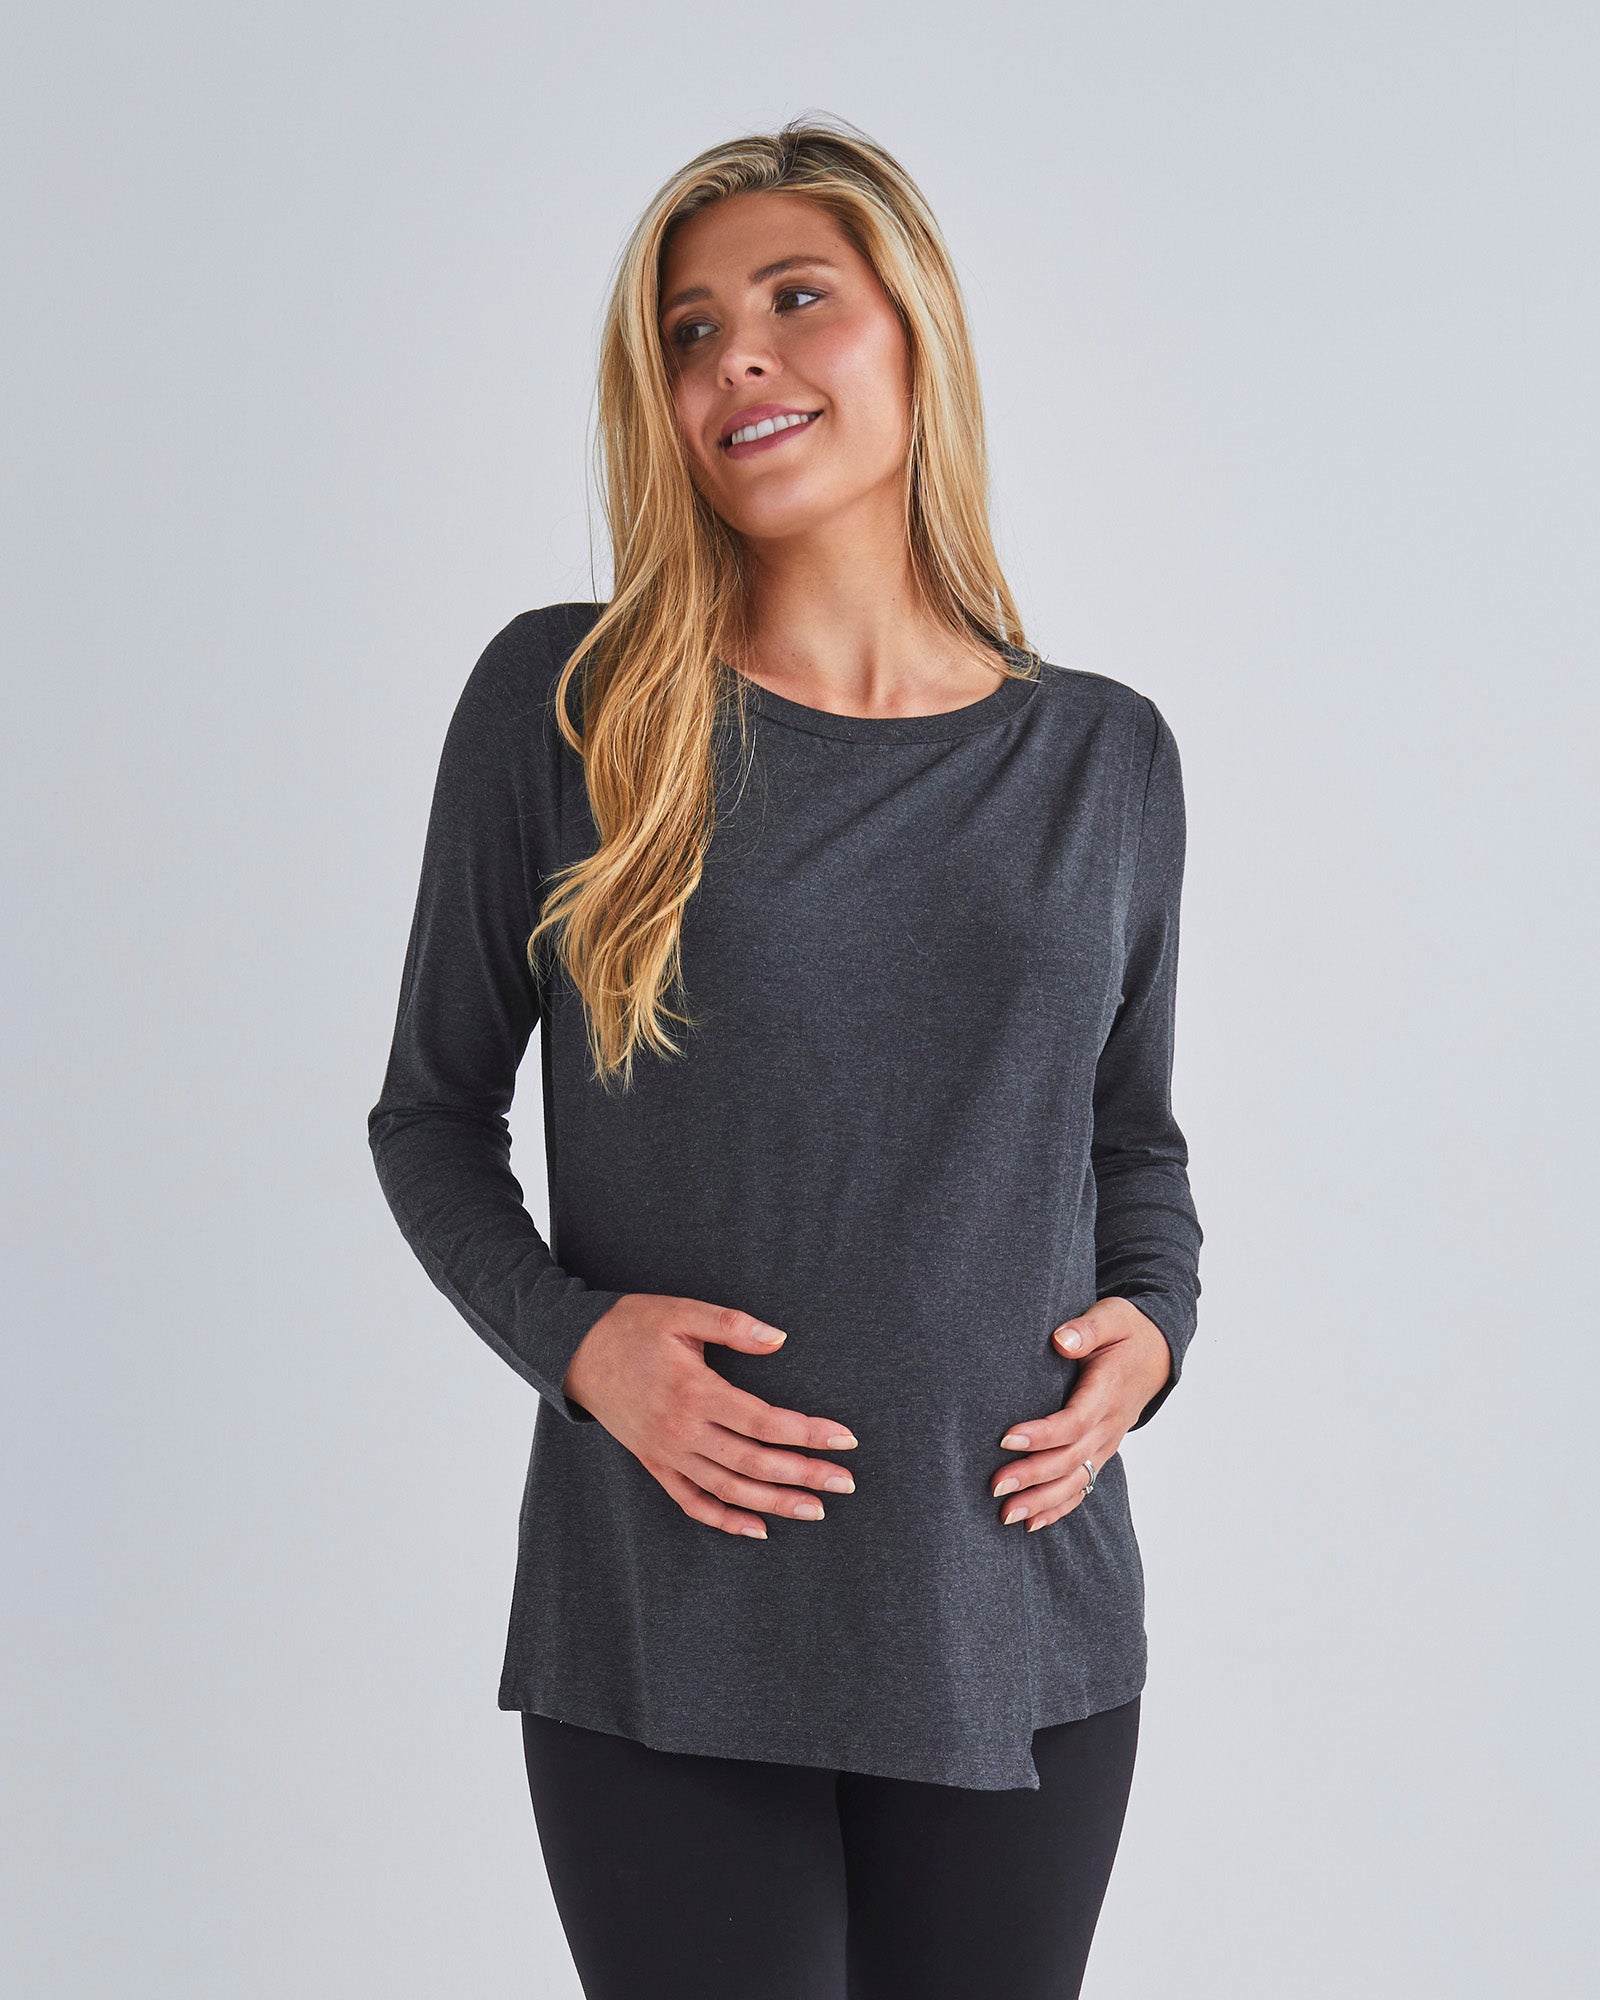 Easy Access Long Sleeve  Nursing Petal Top in Charcoal from Angel Maternity